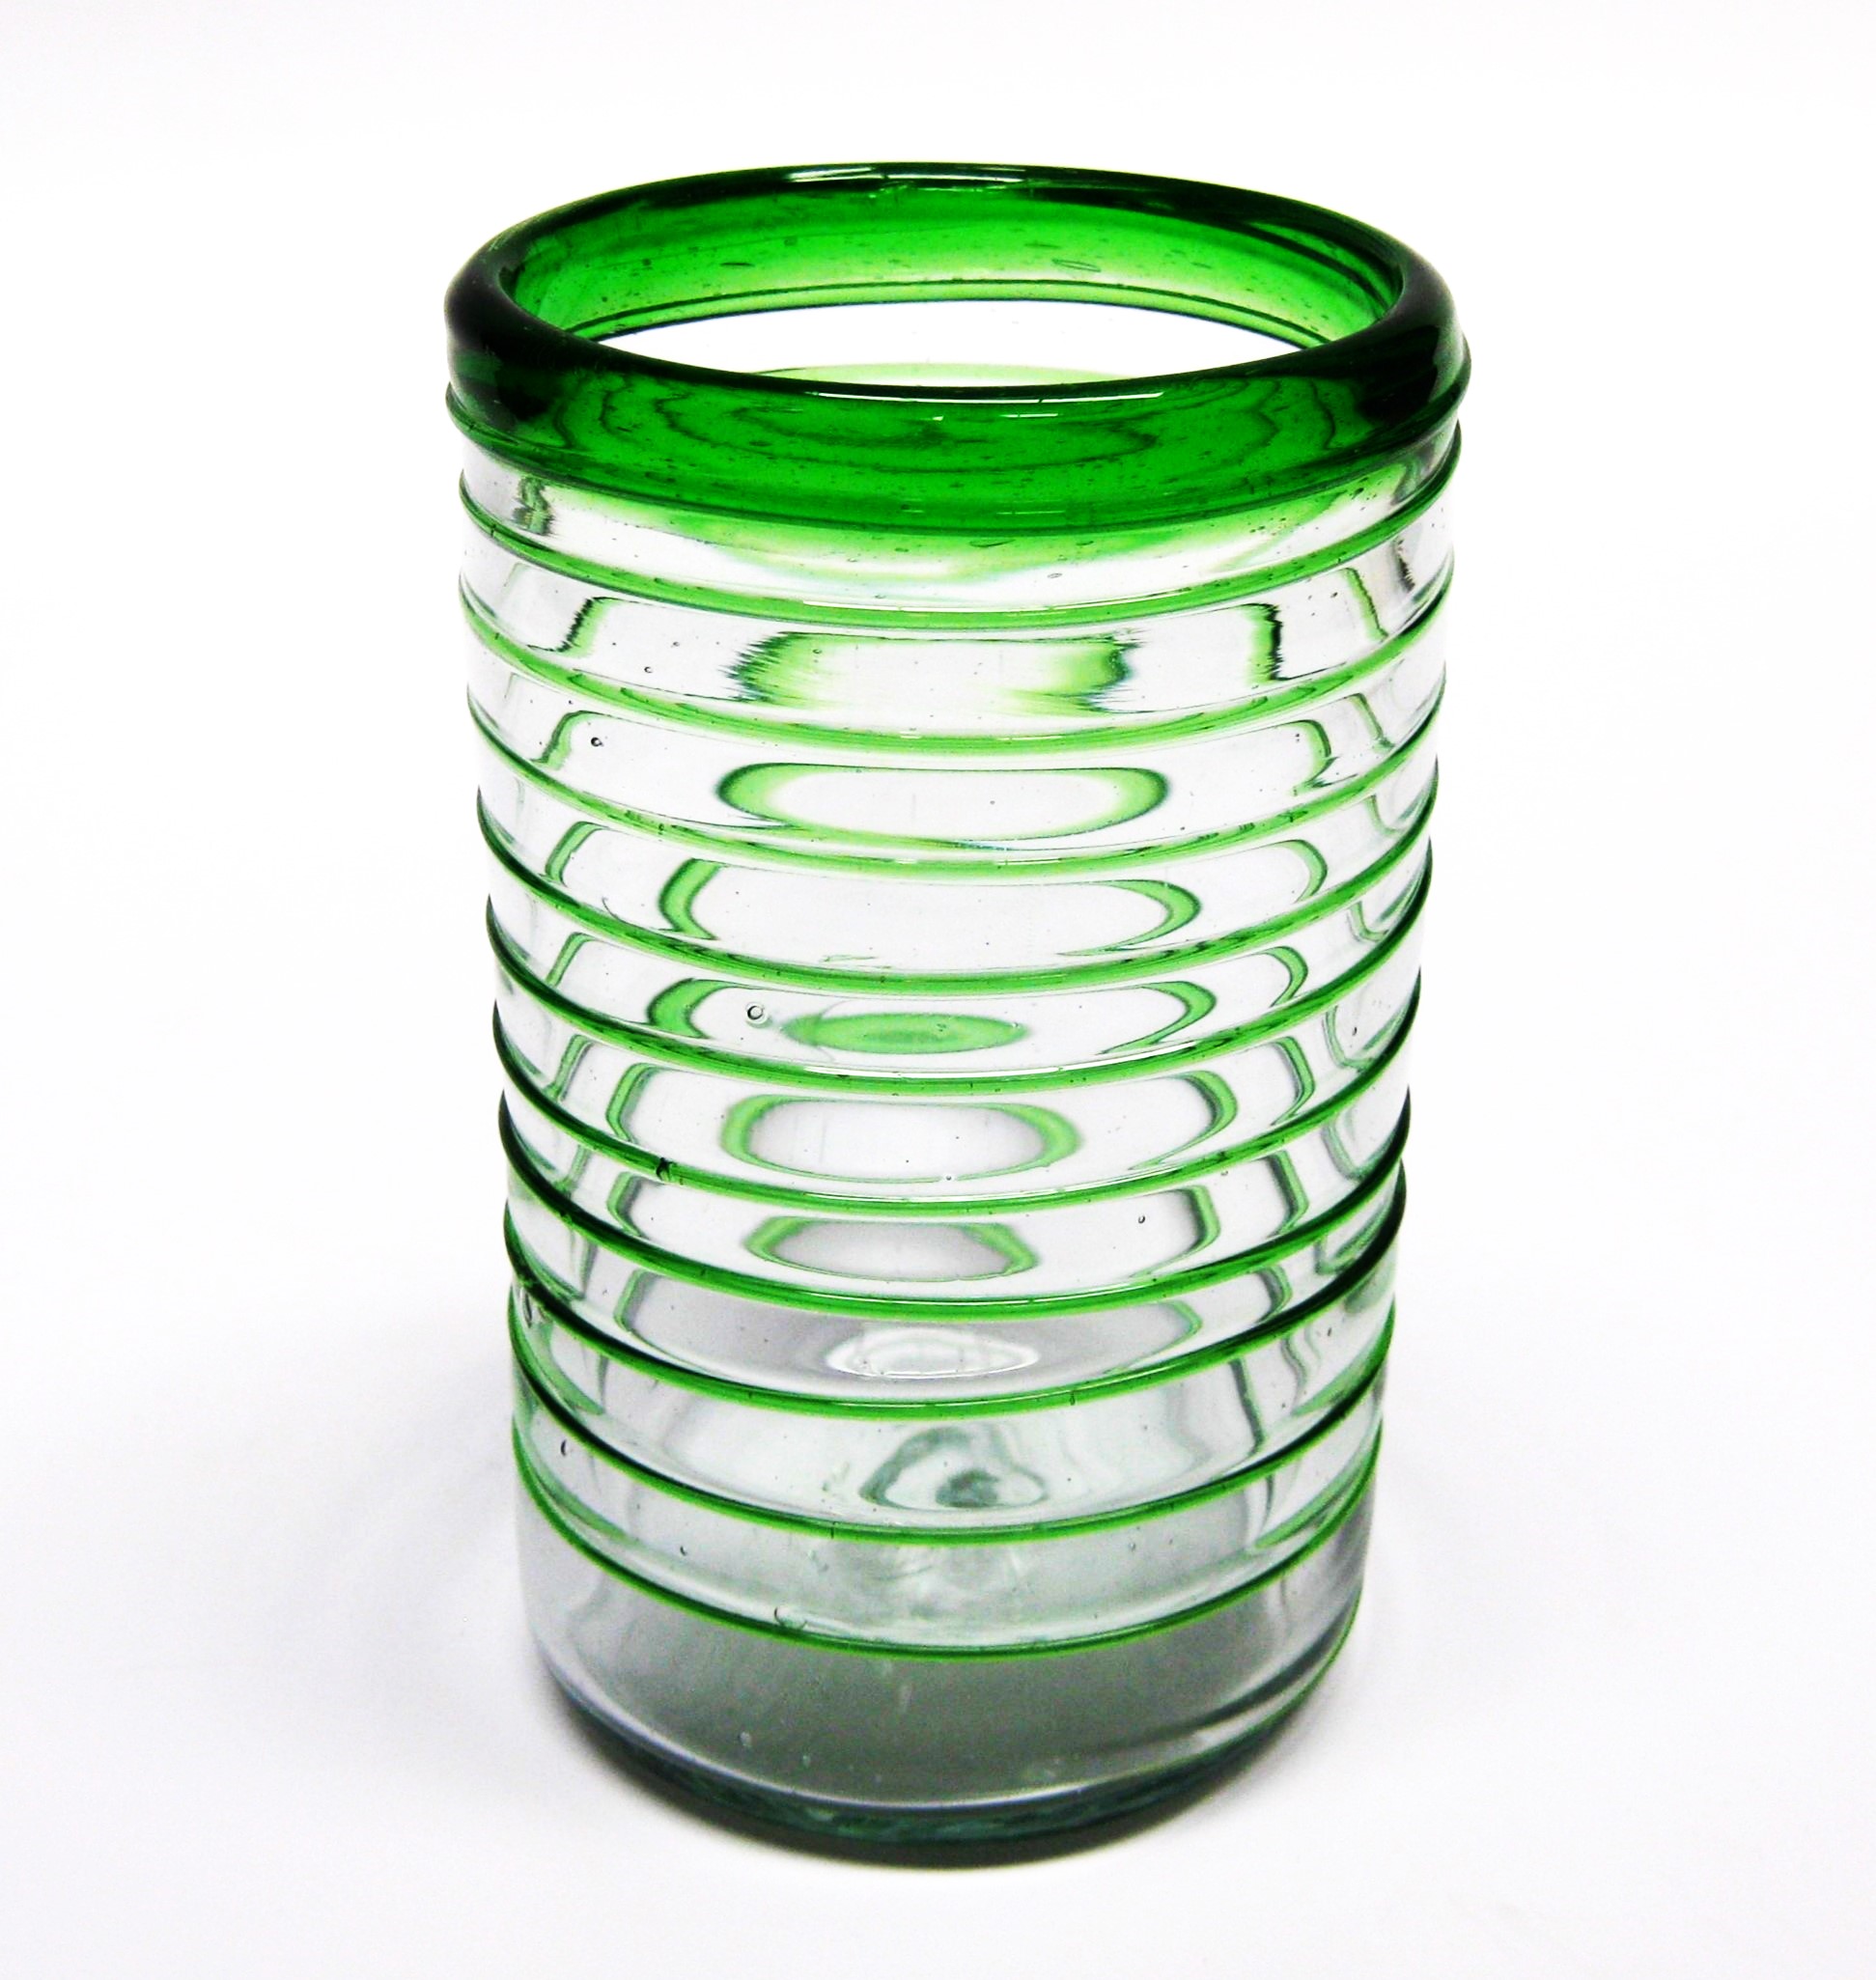 Mexican Glasses / Emerald Green Spiral 14 oz Drinking Glasses (set of 6) / These elegant glasses covered in a emerald green spiral will add a handcrafted touch to your kitchen decor.